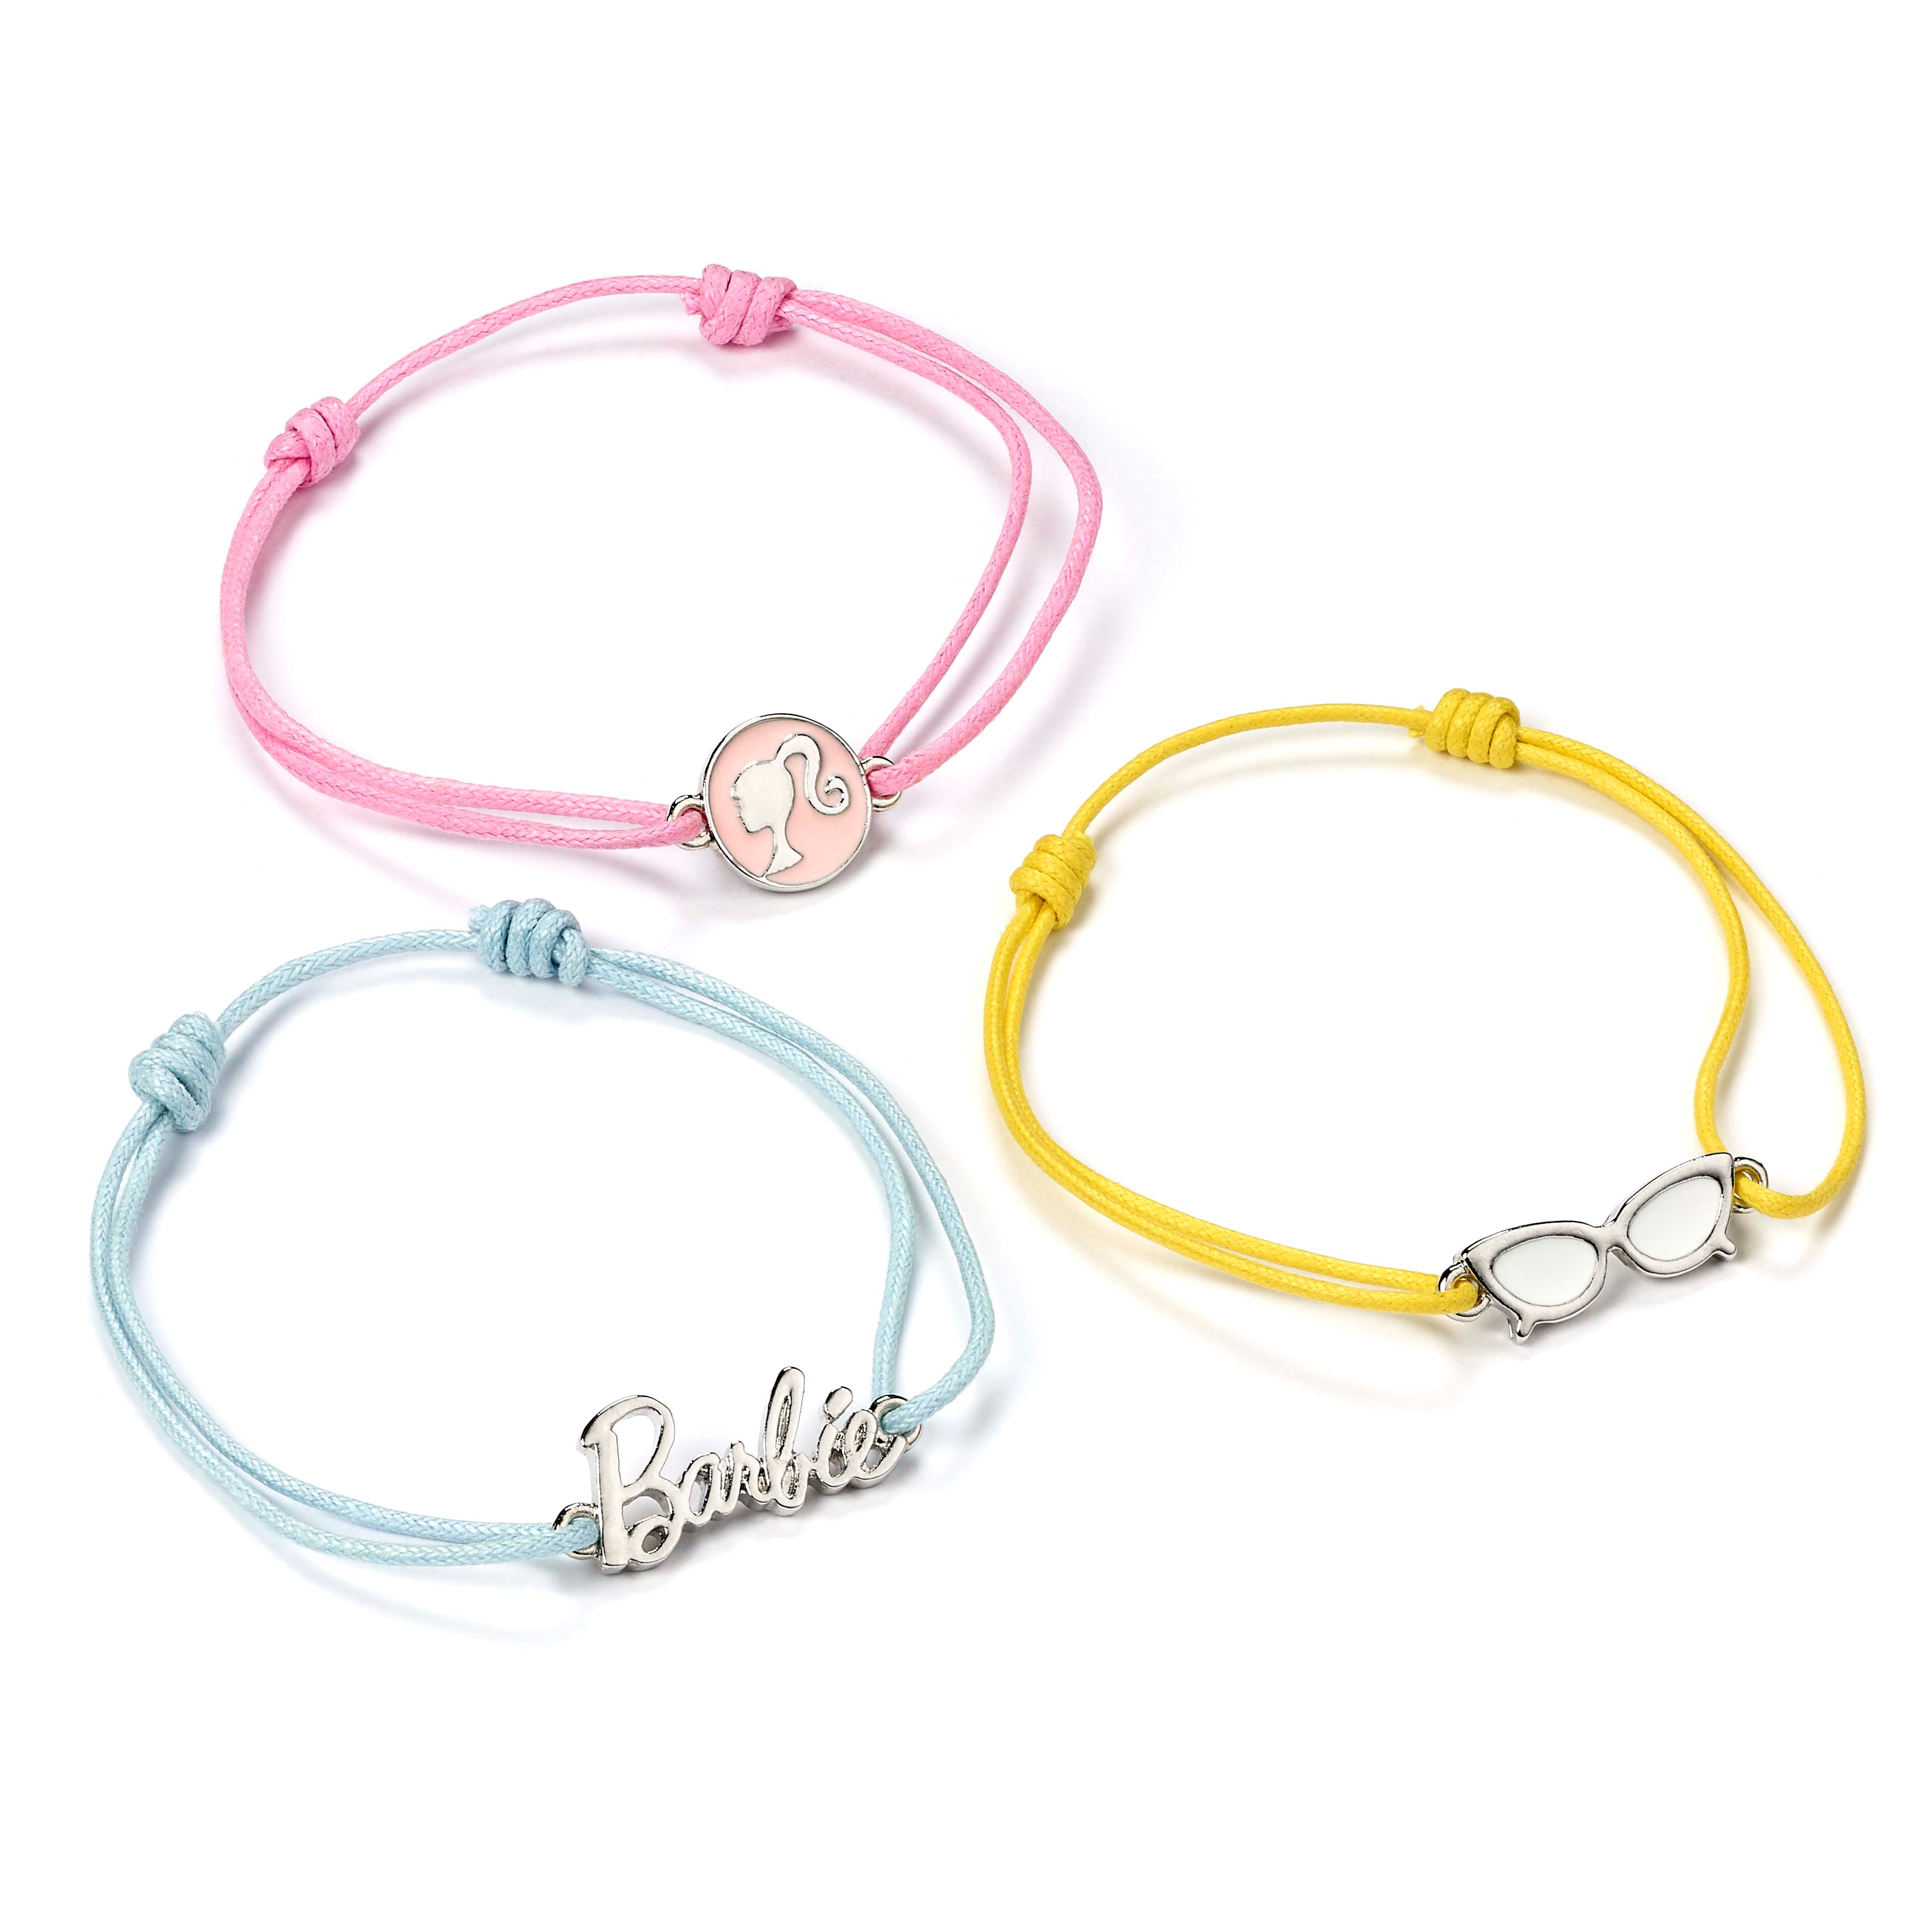 Embellished Infinity Stretch Friendship Bracelets - 3 Pack | Claire's US